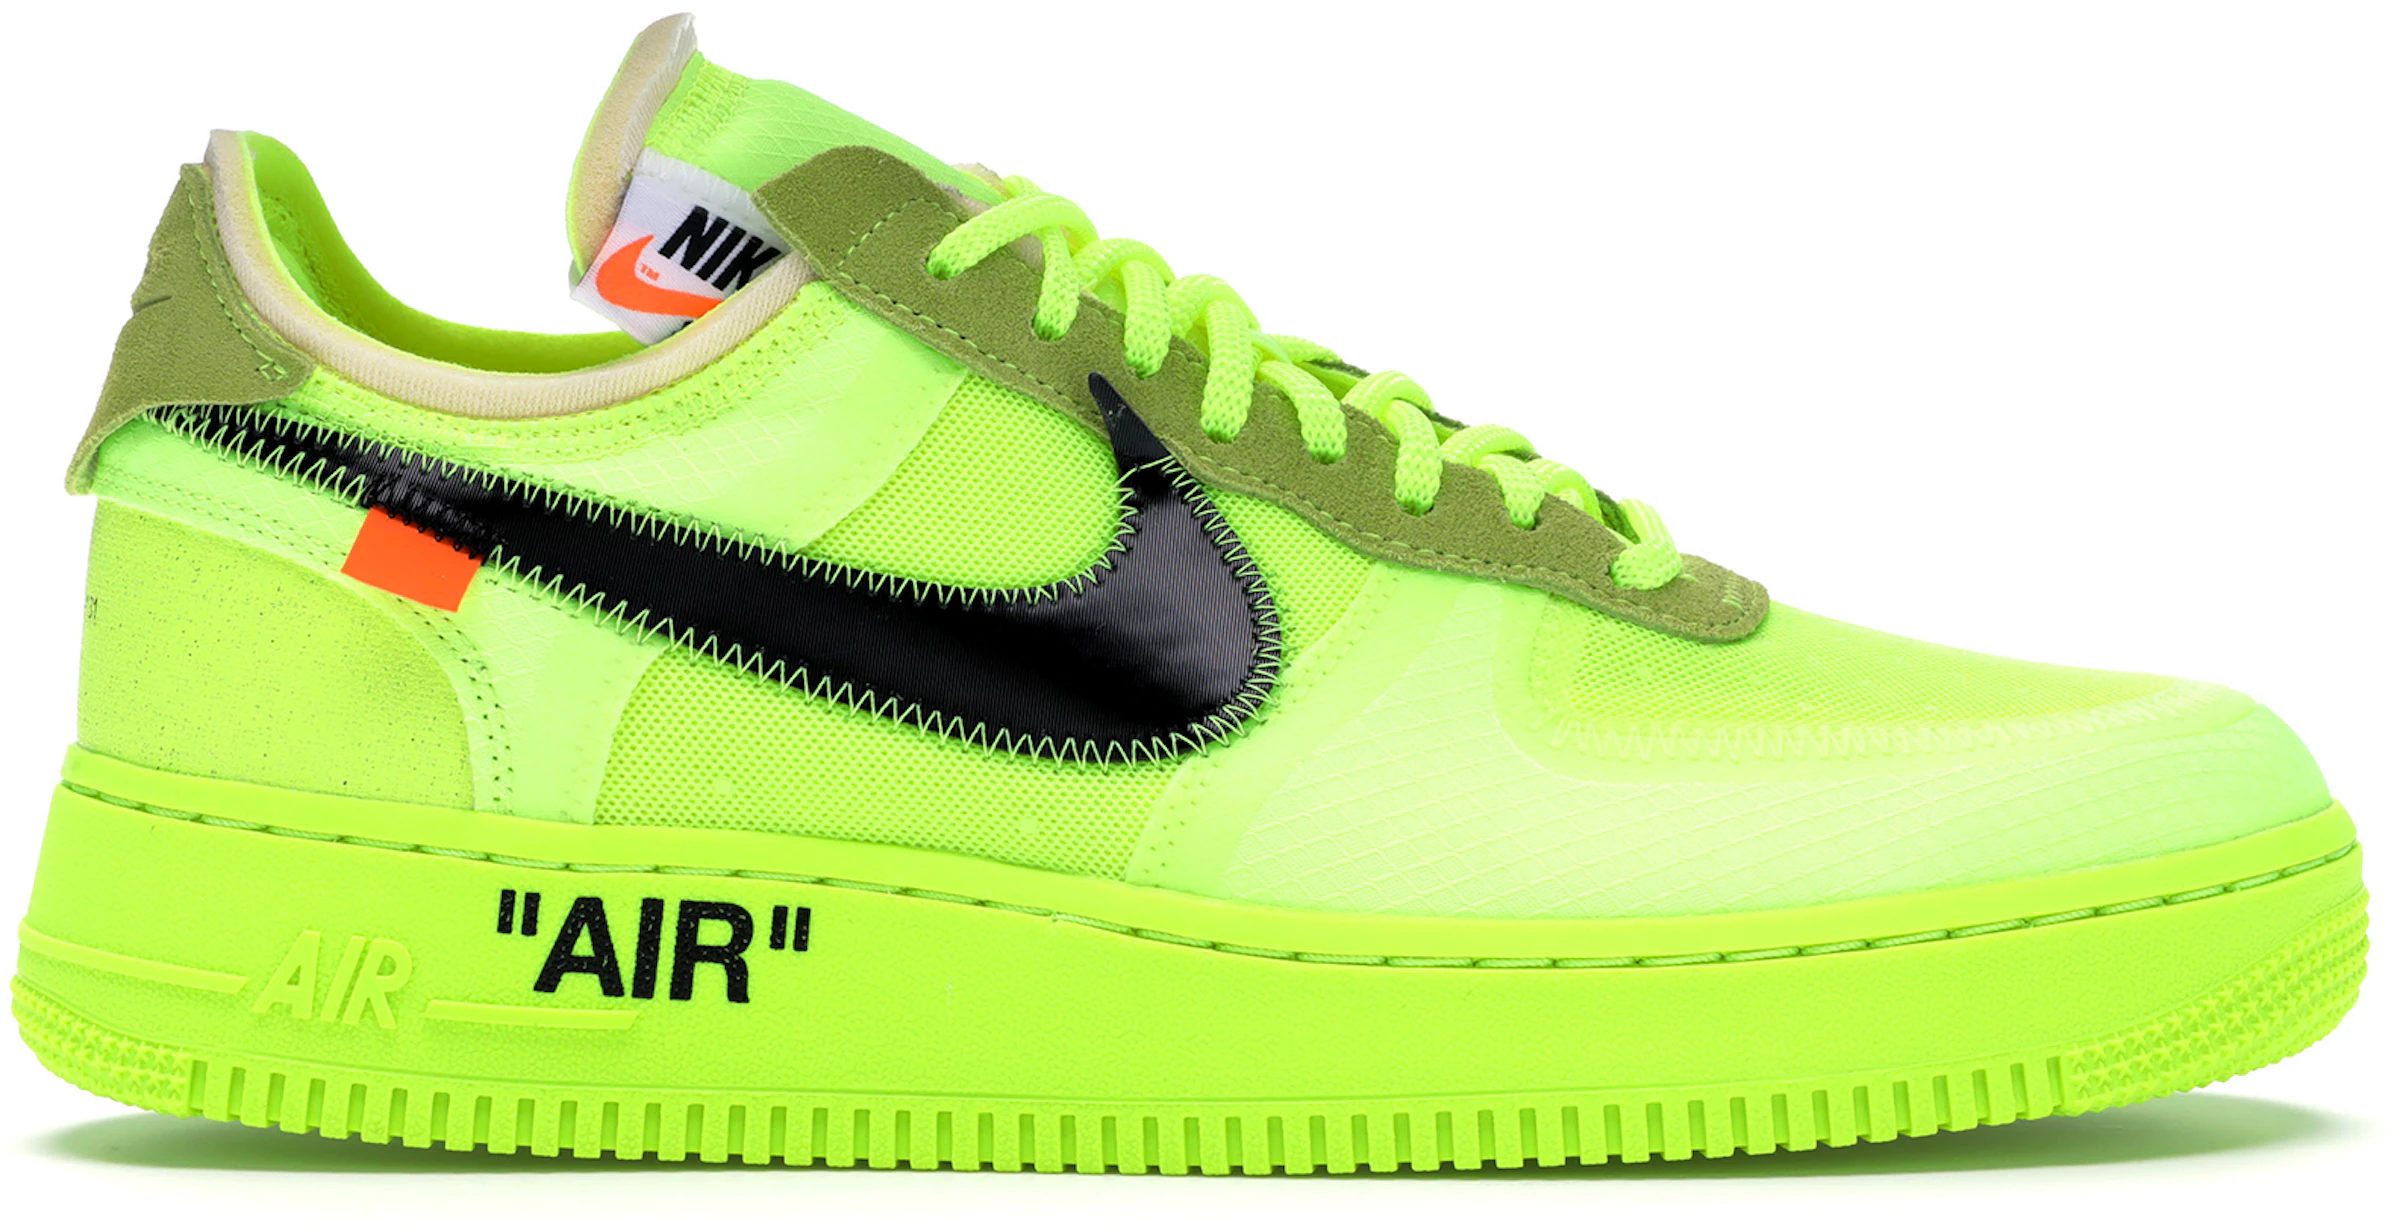 Nike Air Force 1 Low Off-White Volt - AO4606-700 ES